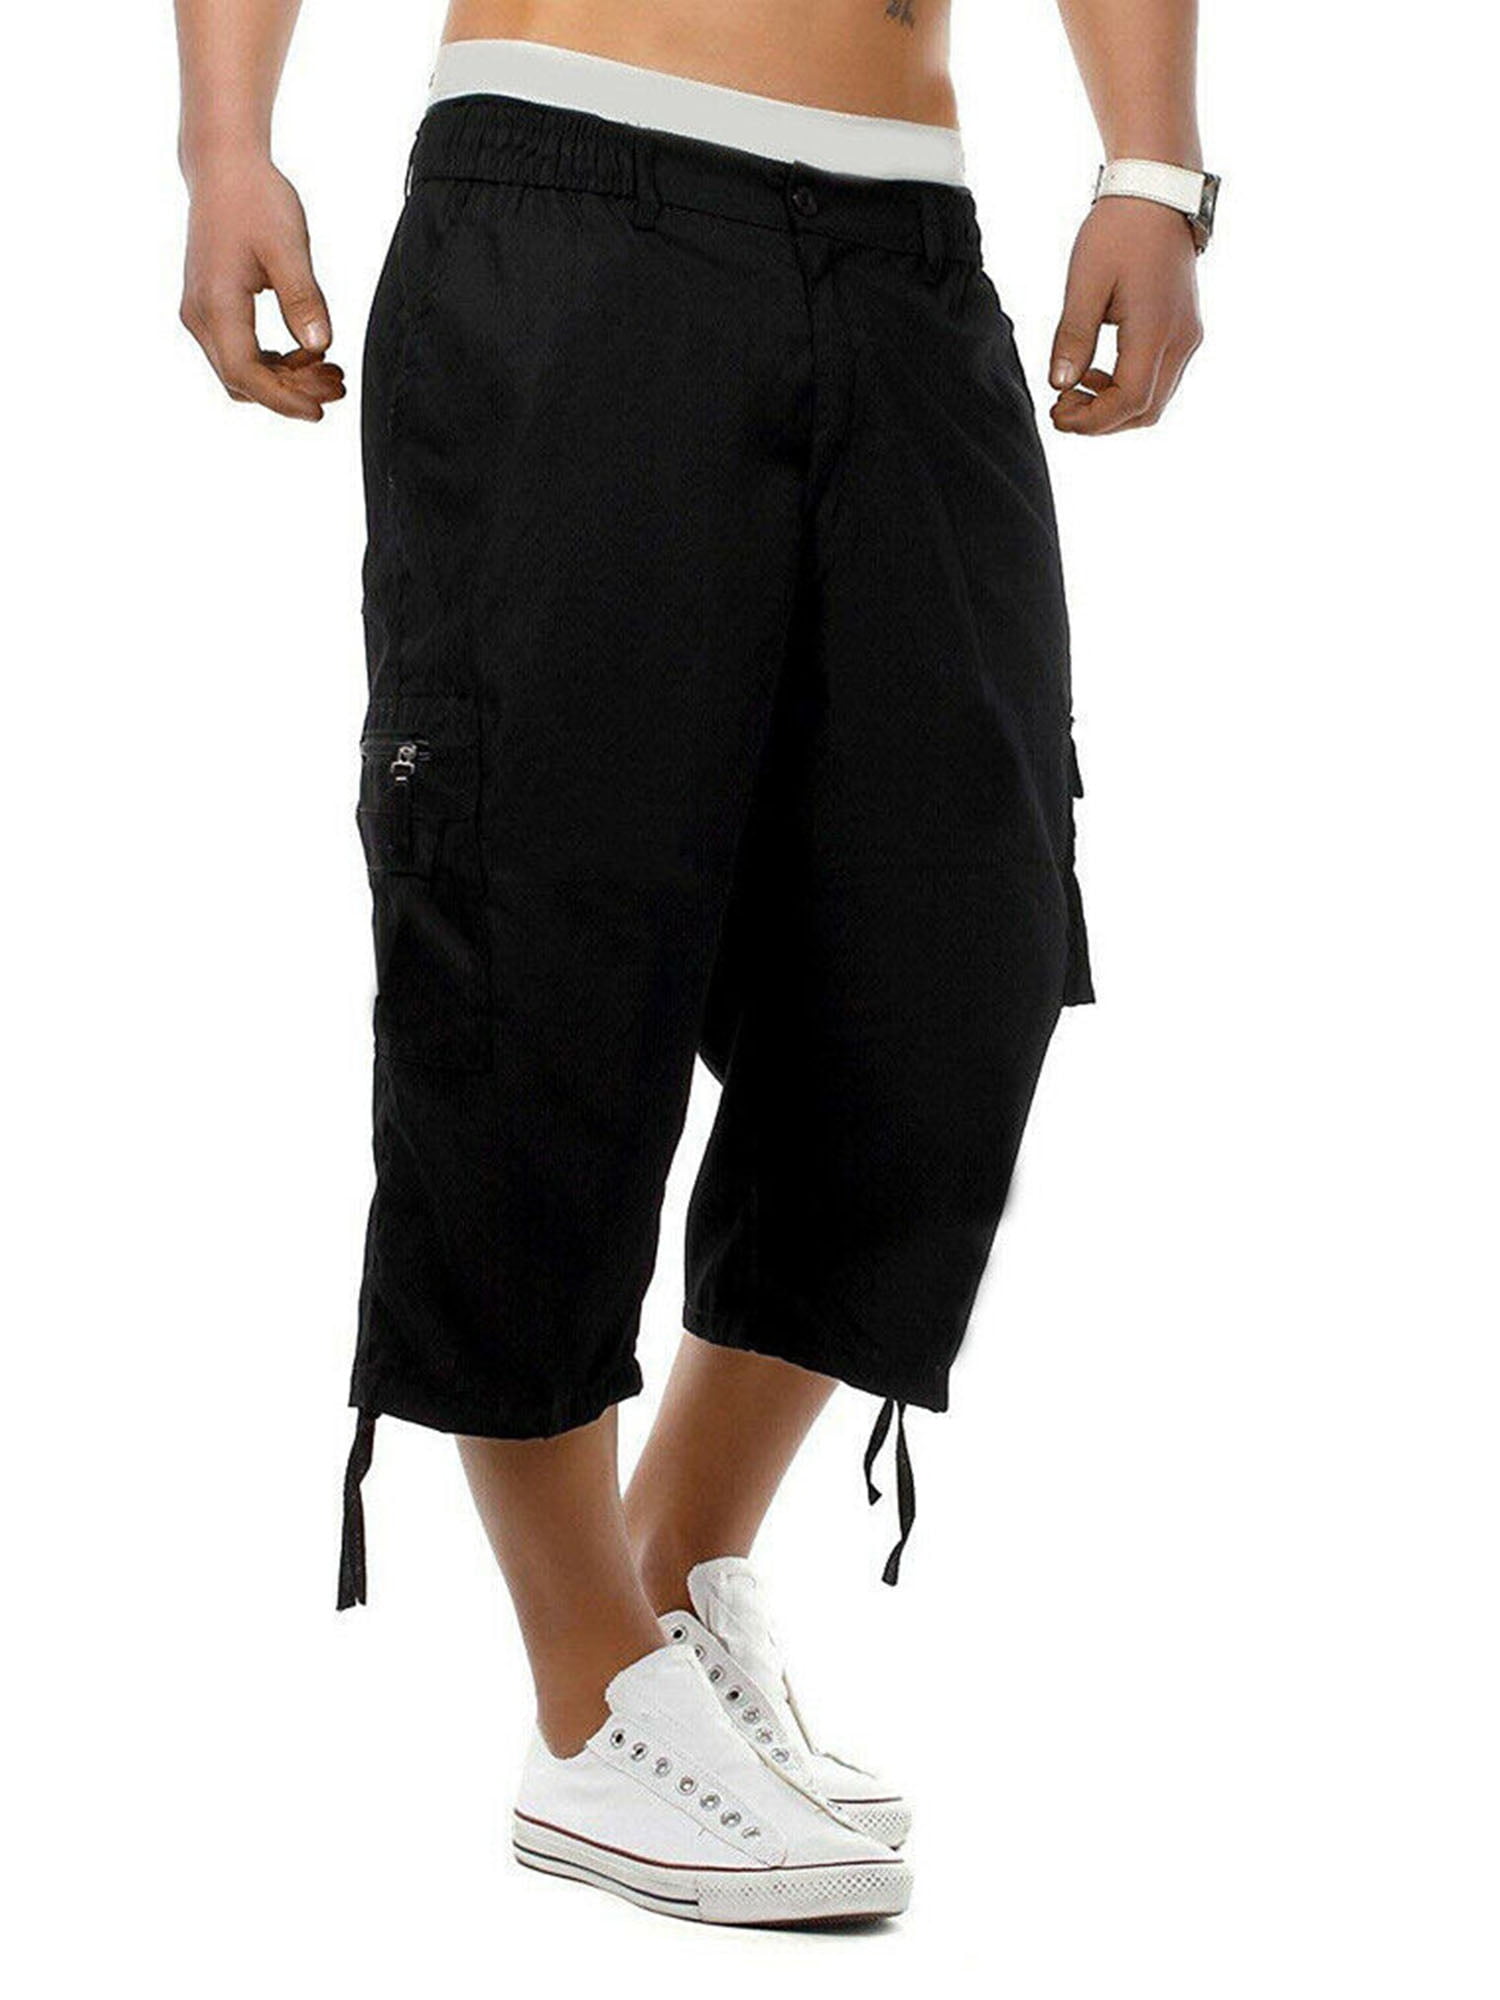 Mens Casual 3/4 Length Cargo Pants Shorts Baggy Cotton Trousers Solid Plus  Size | eBay